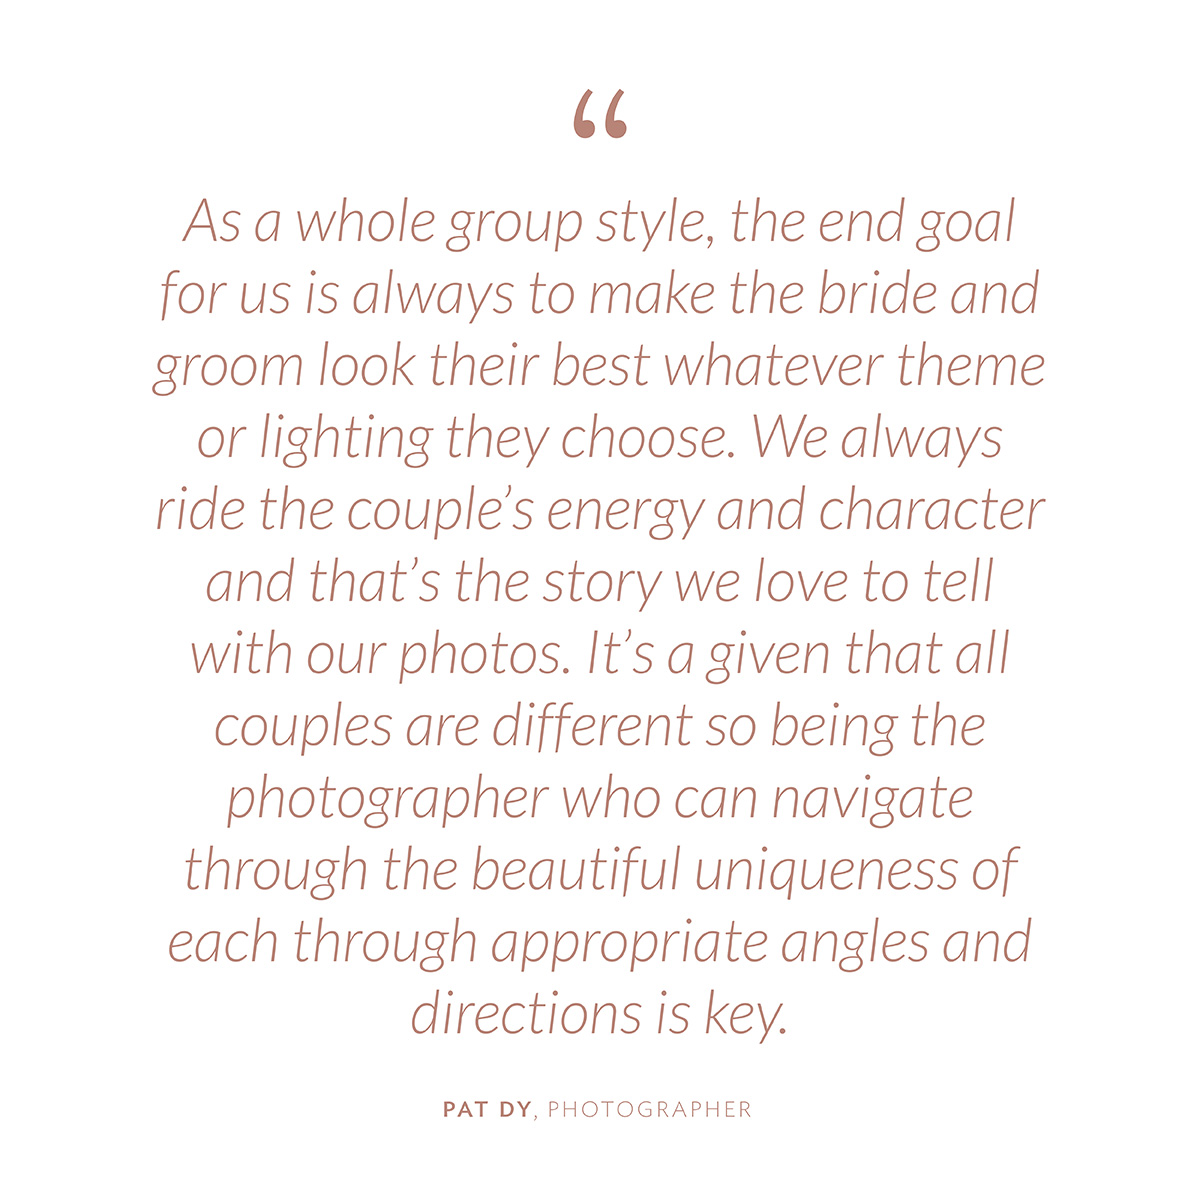 “As a whole group style, the end goal for us is always to make the bride and groom look their best whatever theme or lighting they choose. We always ride the couple’s energy and character and that’s the story we love to tell with our photos. It’s a given that all couples are different so being the photographer who can navigate through the beautiful uniqueness of each through appropriate angles and directions is key.” -Pat Dy